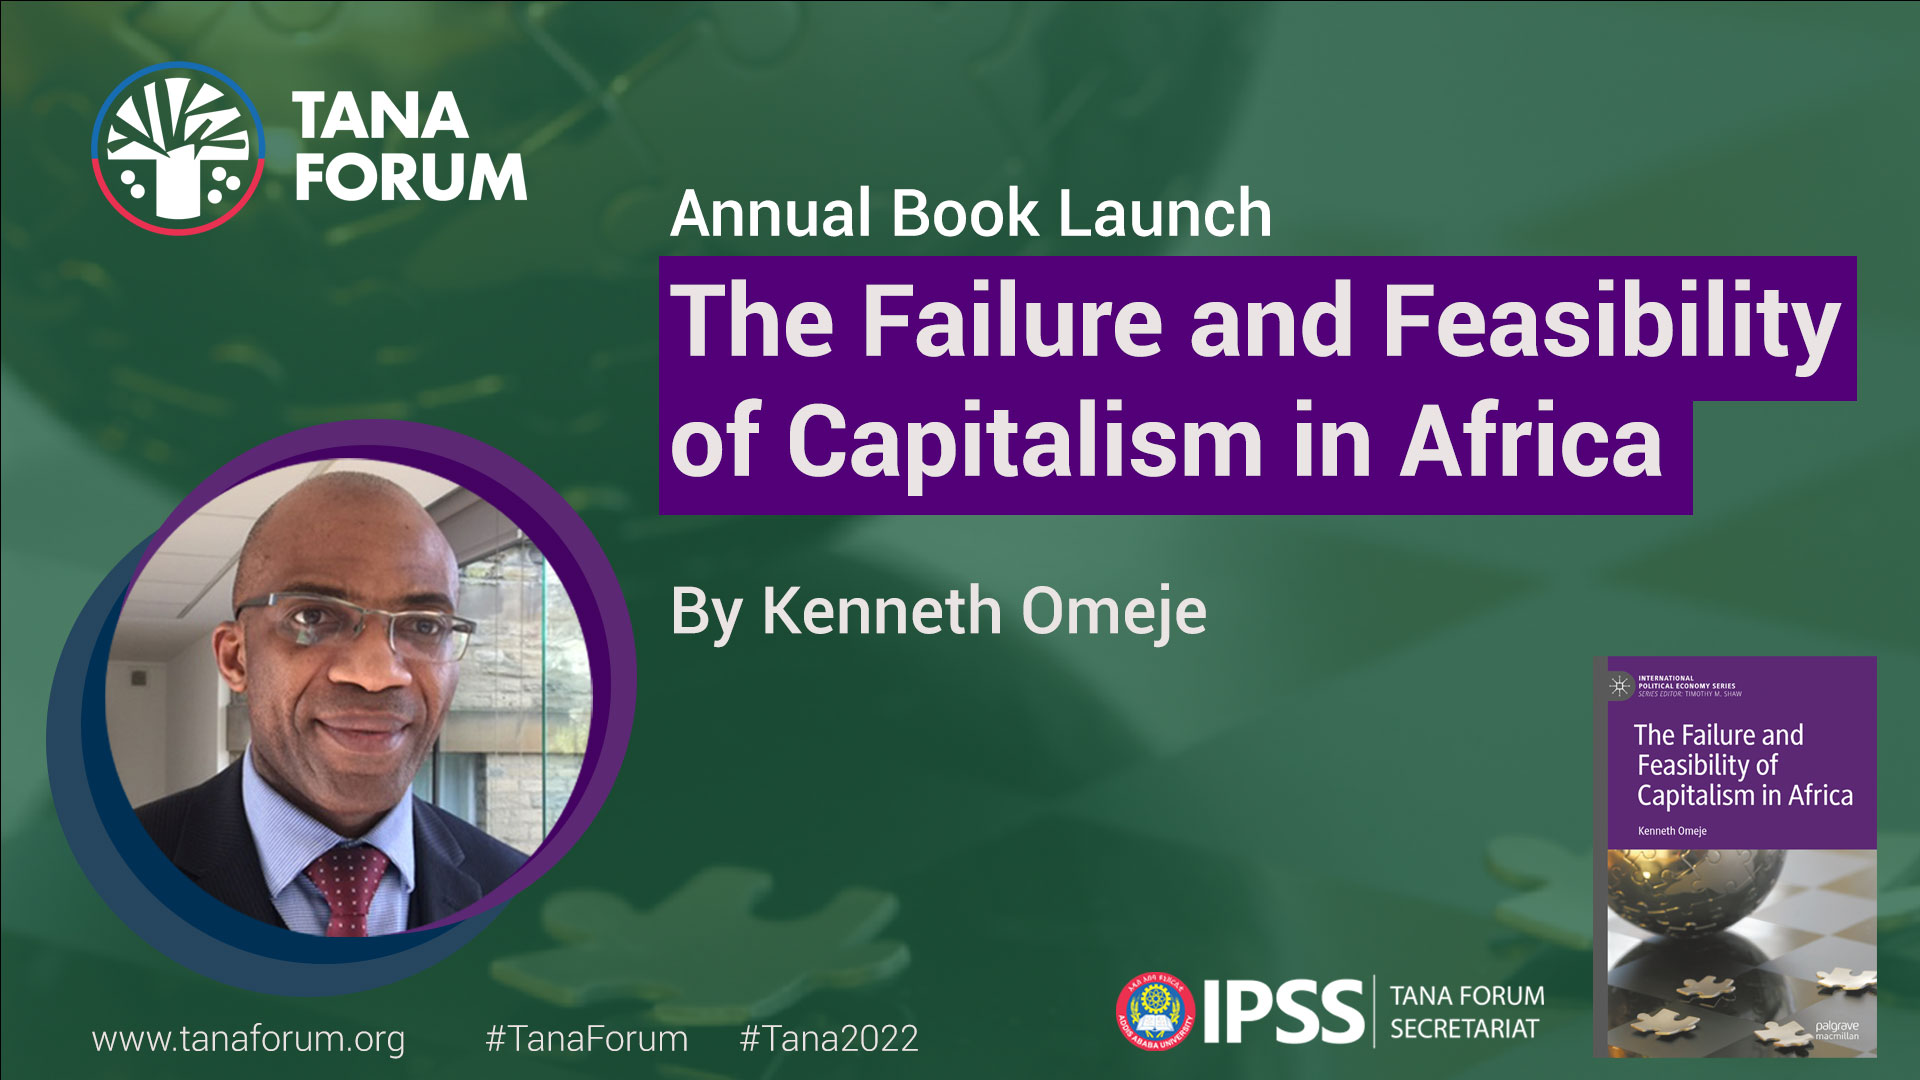 The Book Selected for the 10th Tana Forum is “The Failure and Feasibility of Capitalism in Africa.”